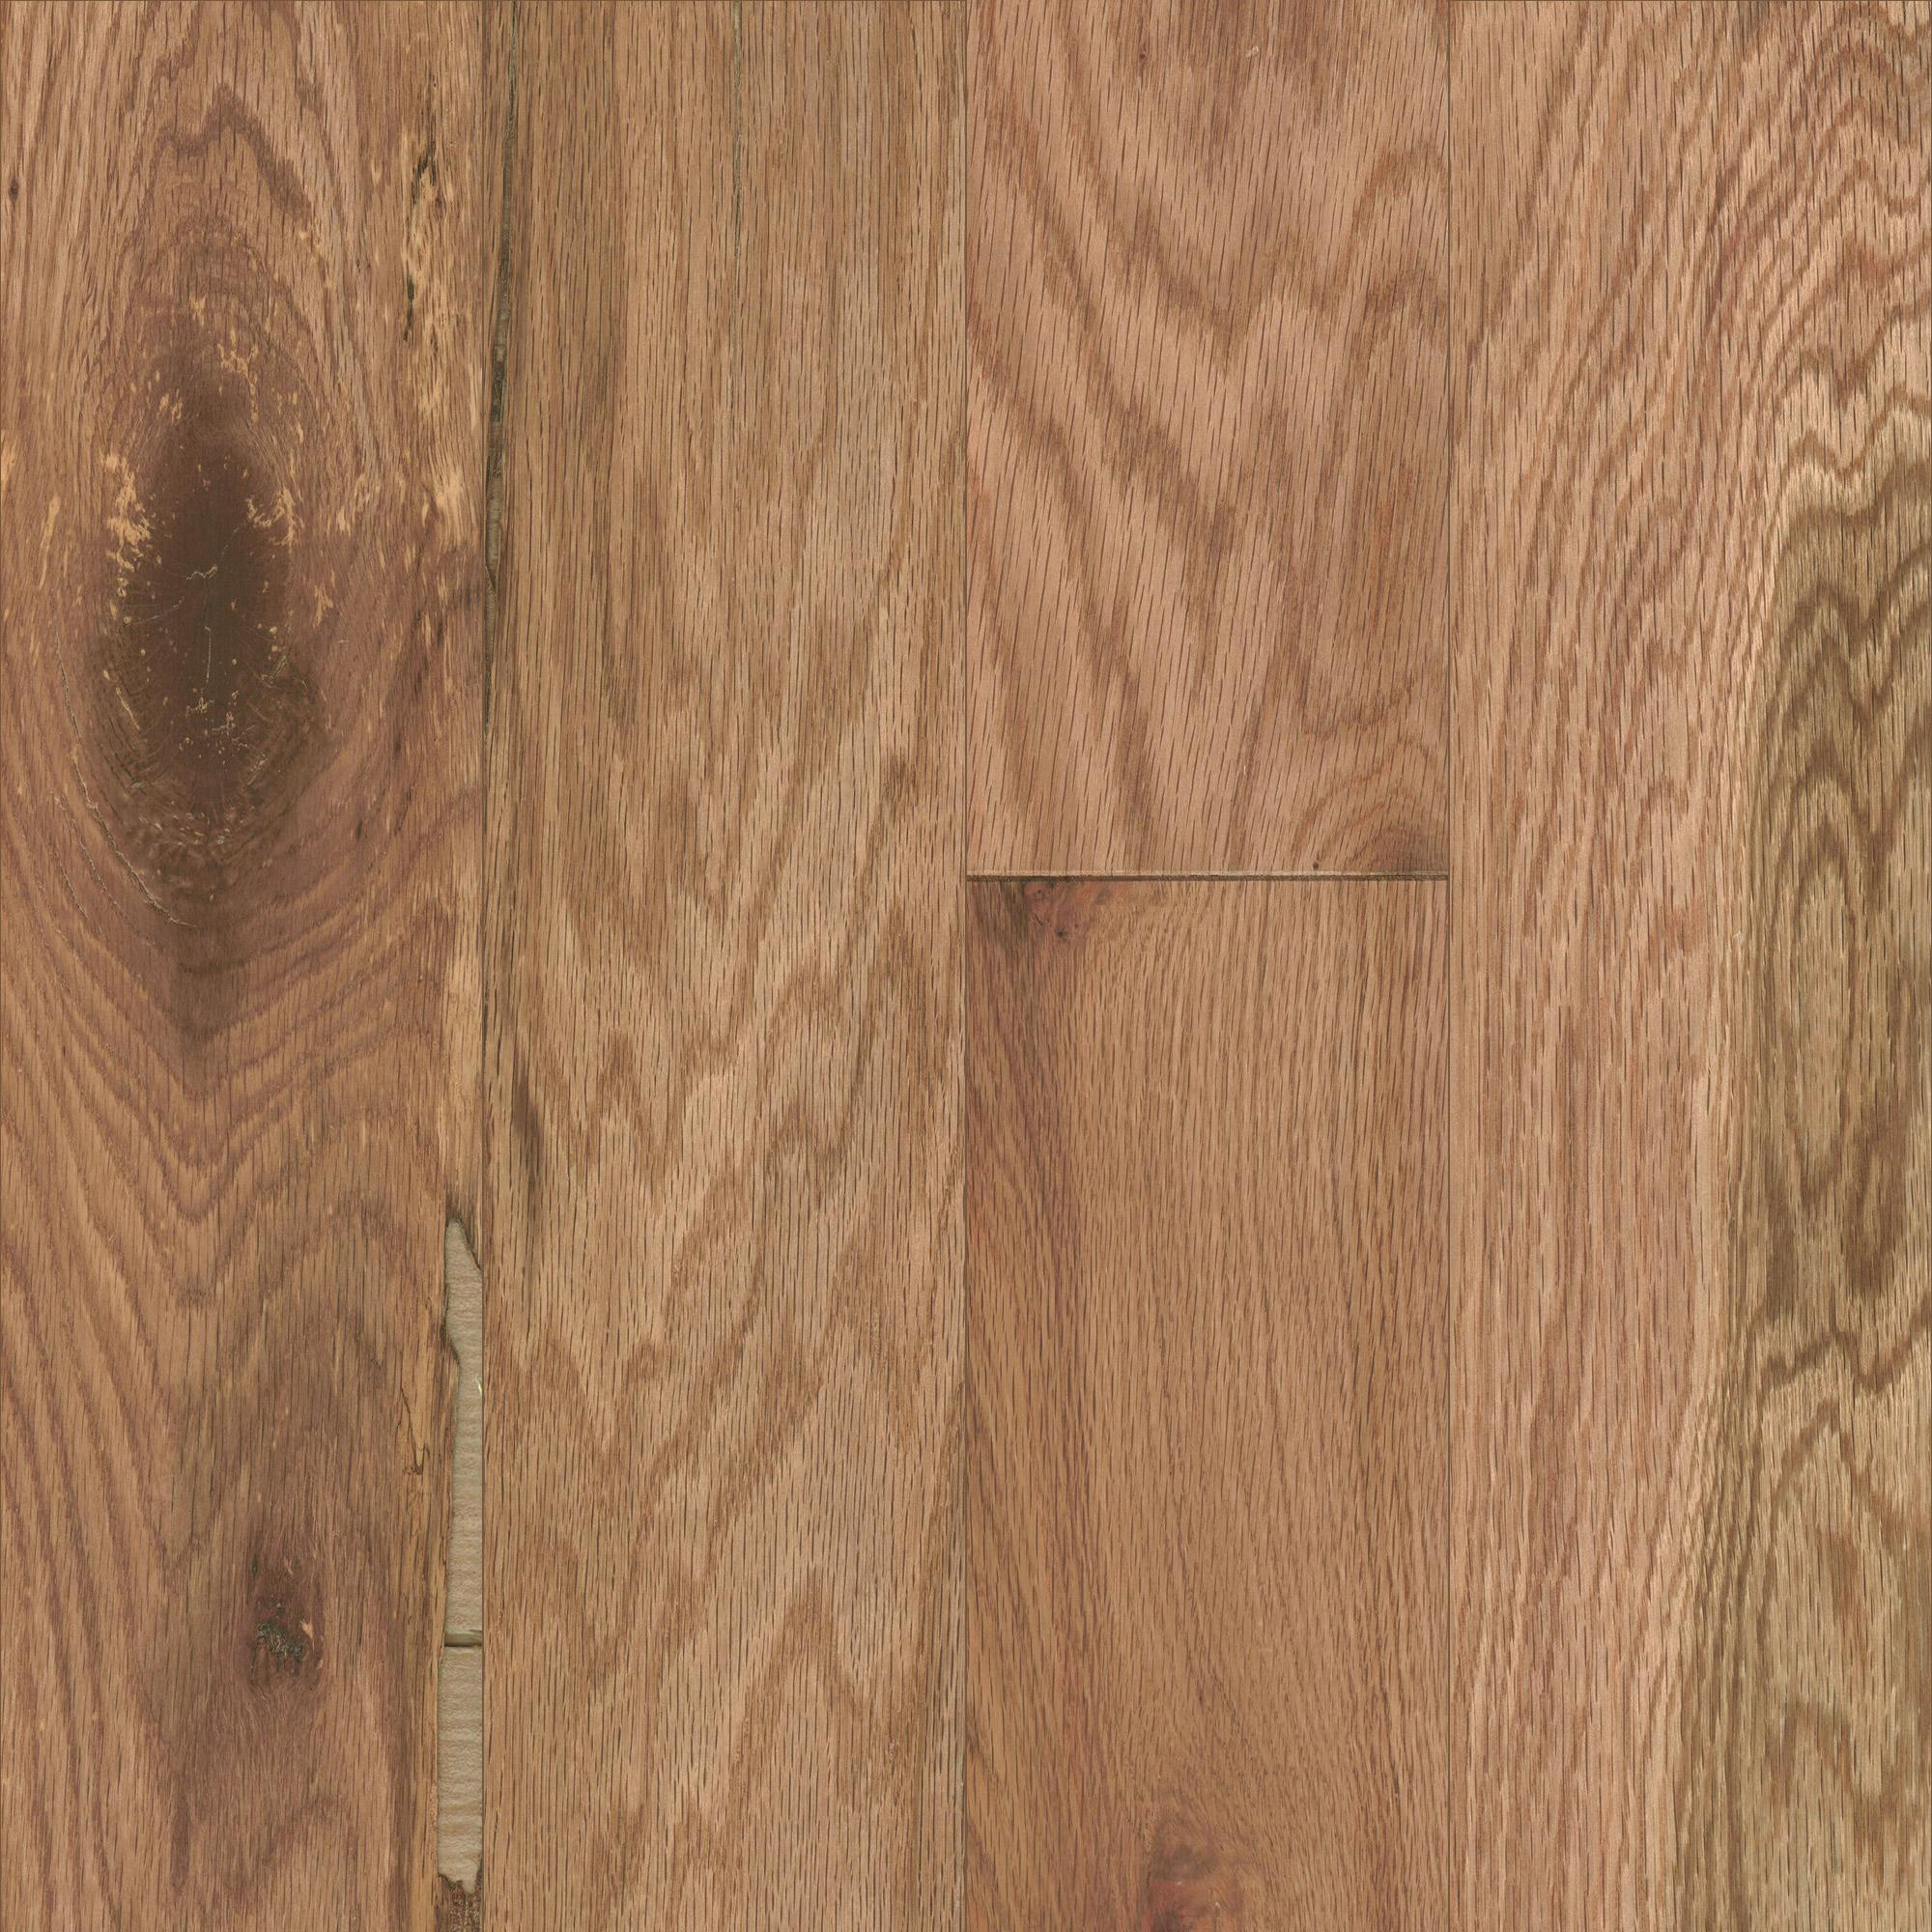 11 Perfect Red Oak Hardwood Flooring Reviews 2024 free download red oak hardwood flooring reviews of mullican ridgecrest red oak natural 1 2 thick 5 wide engineered with regard to mullican ridgecrest red oak natural 1 2 thick 5 wide engineered hardwood f